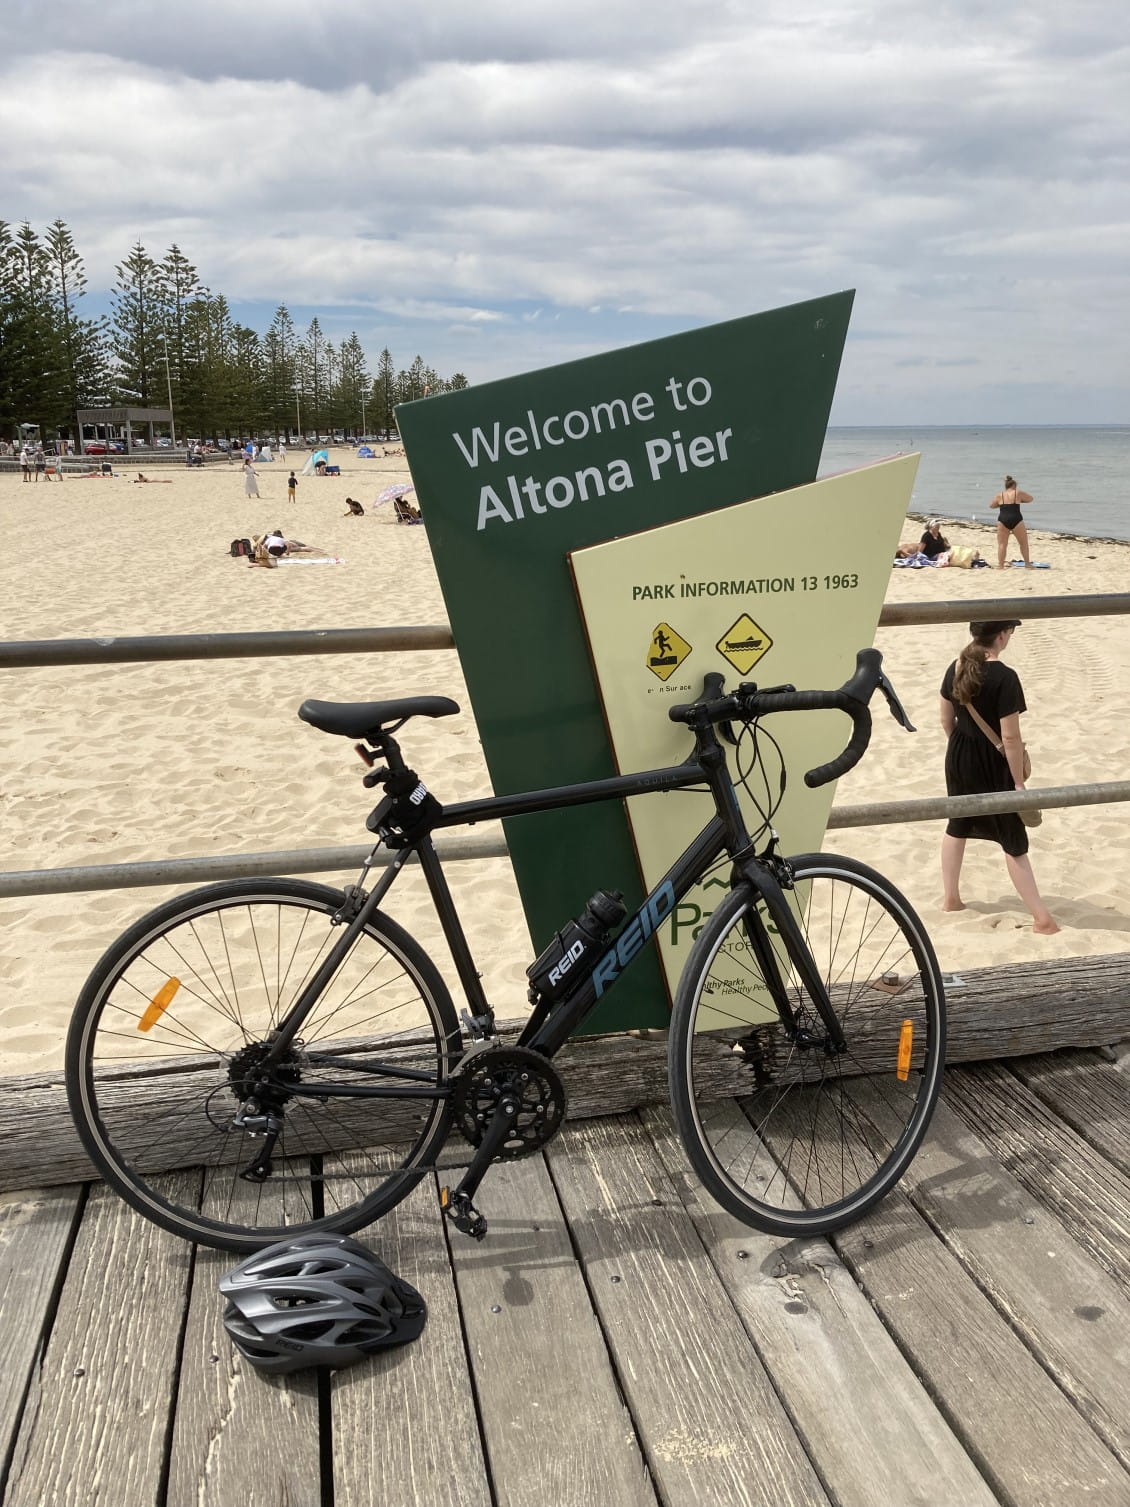 A bike leans against a railing with a sign saying "Welcome to Altona Pier". Behind the railing is a sandy beach with people sunbathing.